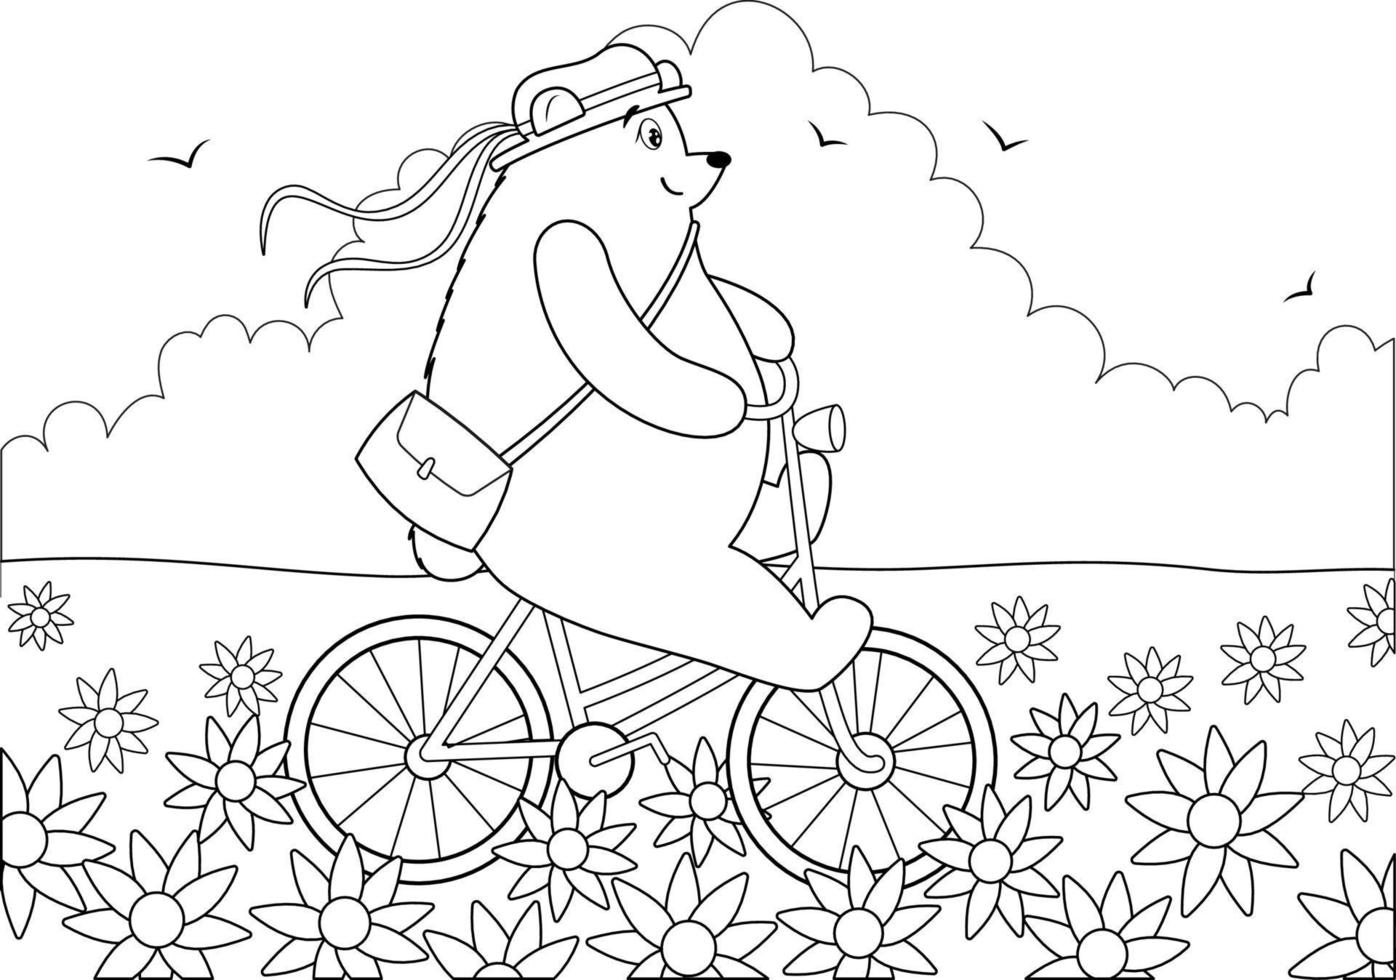 Coloring page with a bear on a bicycle vector